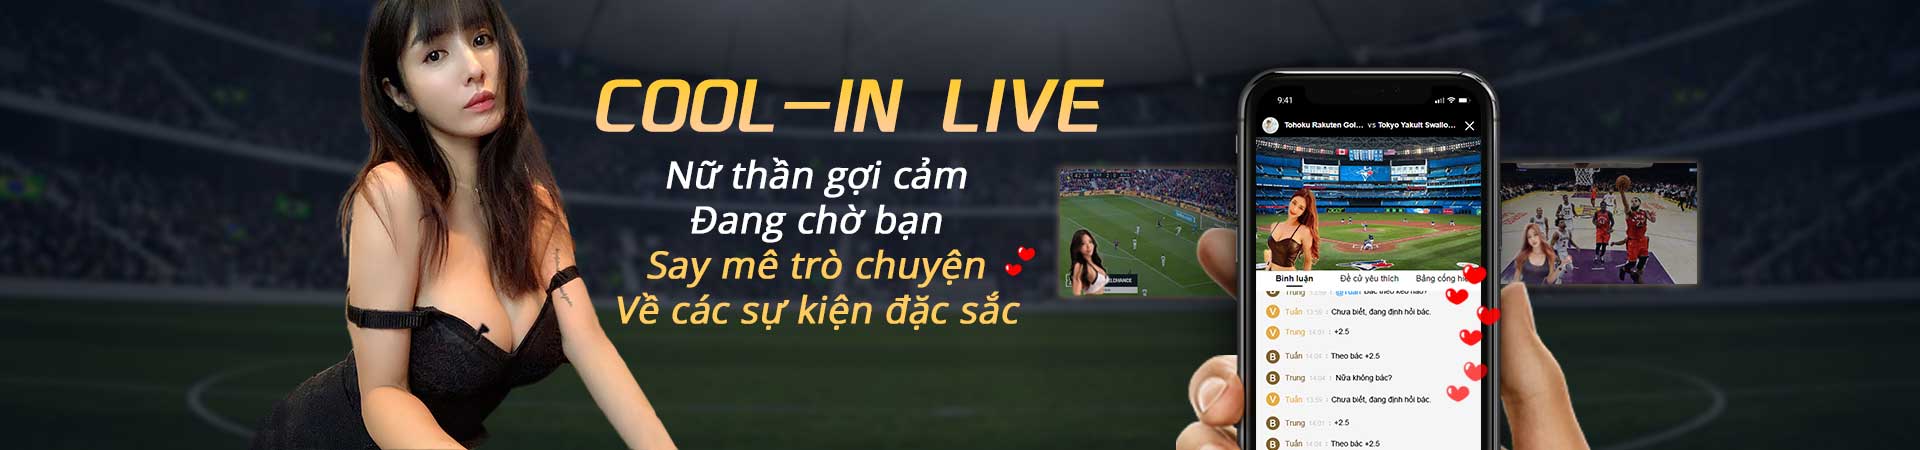 Cool in live ra mắt giao diện Mobie